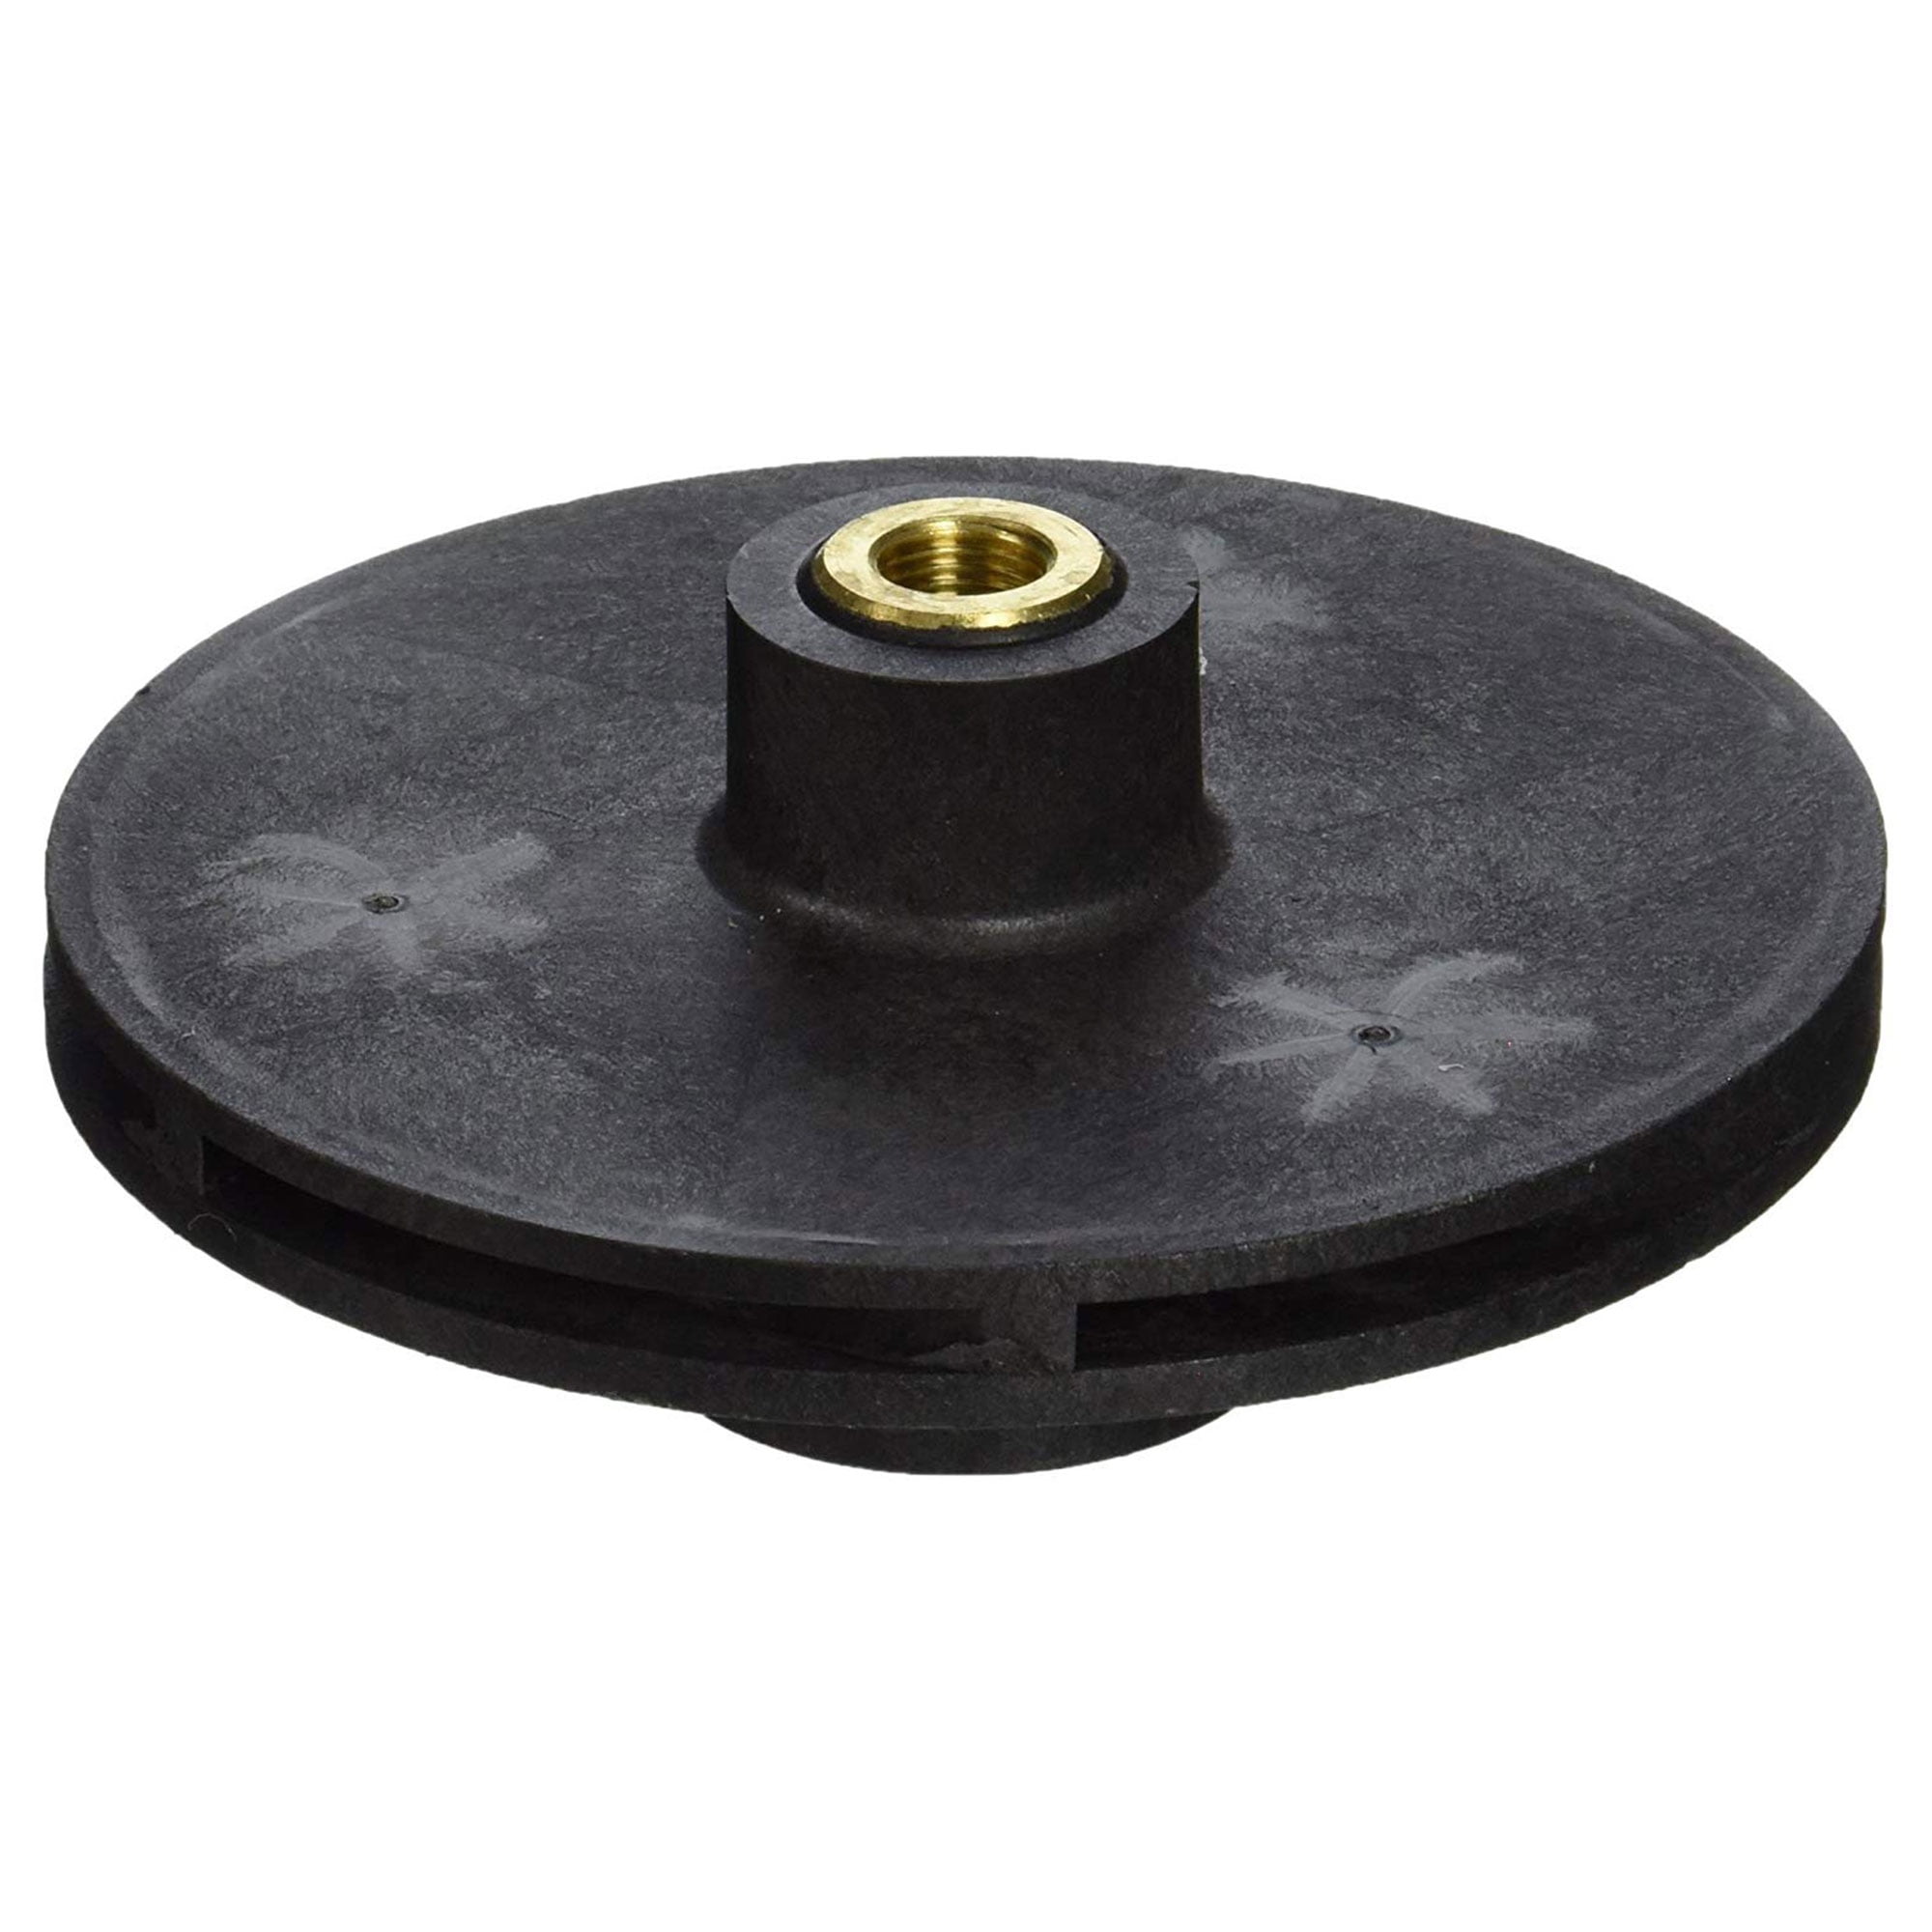 Pentair 355315 Impeller Replacement for Challenger High Pressure Pool Pumps 